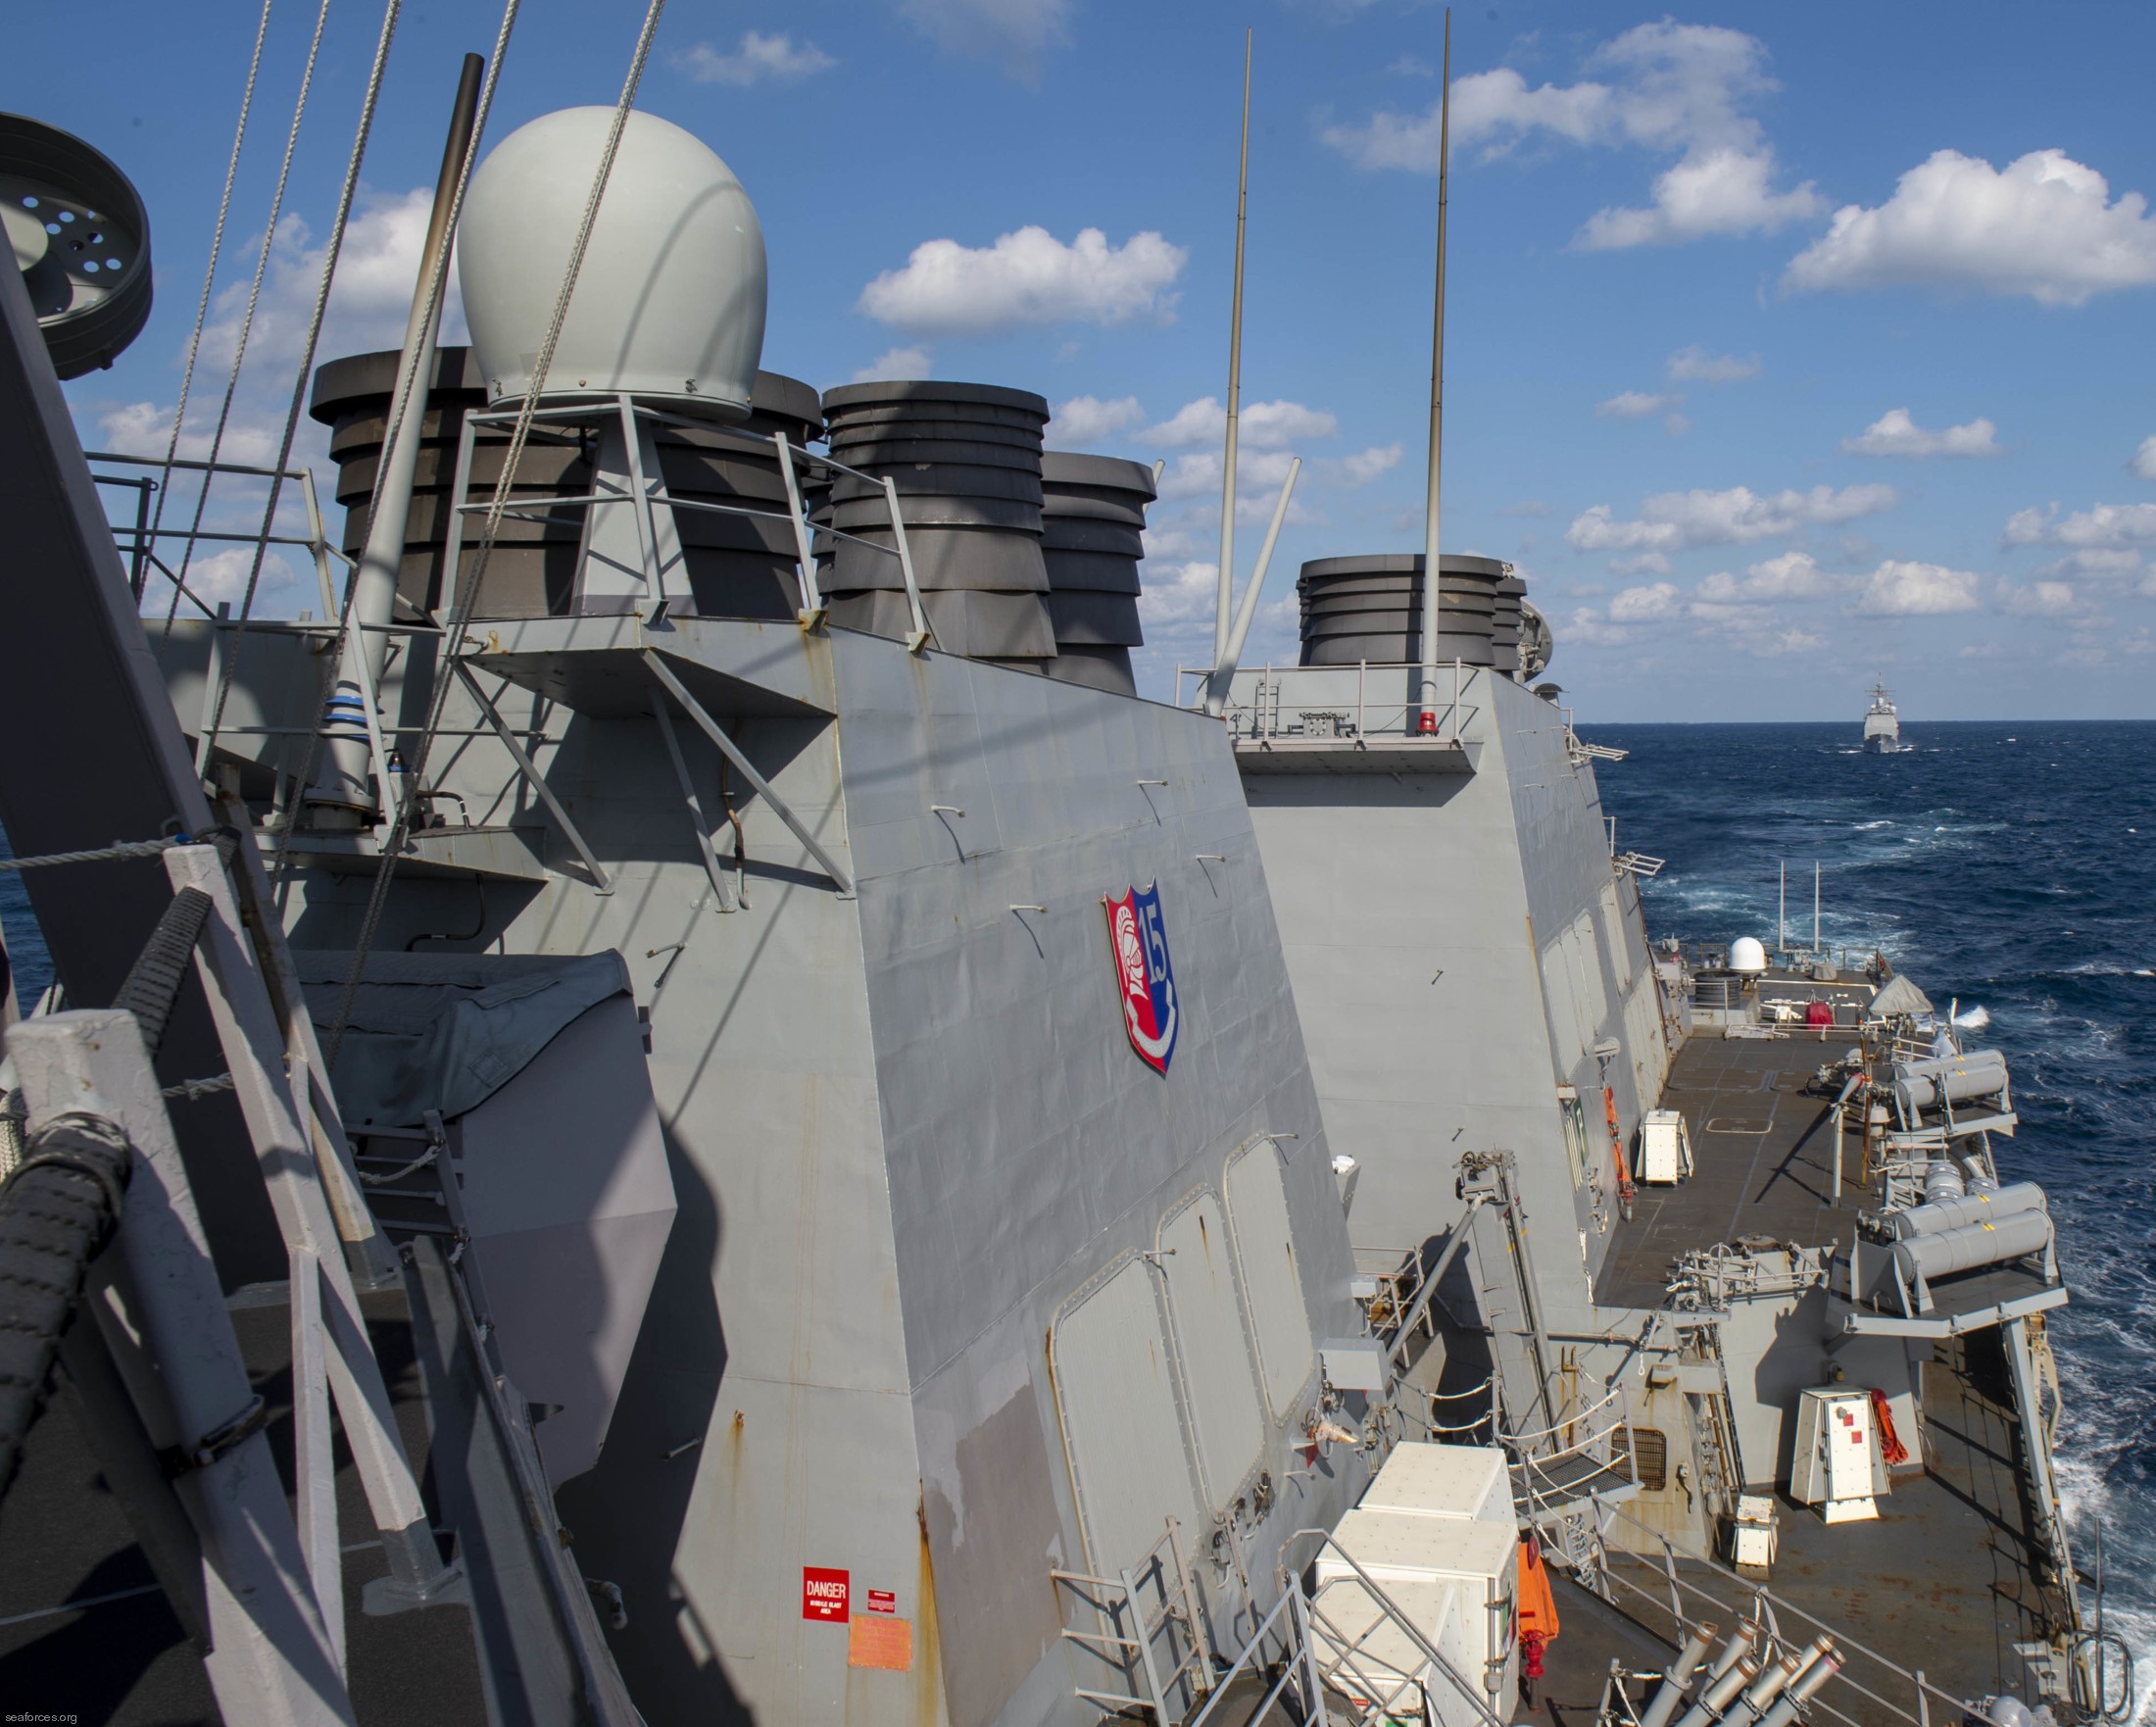 ddg-52 uss barry arleigh burke class guided missile destroyer us navy 102